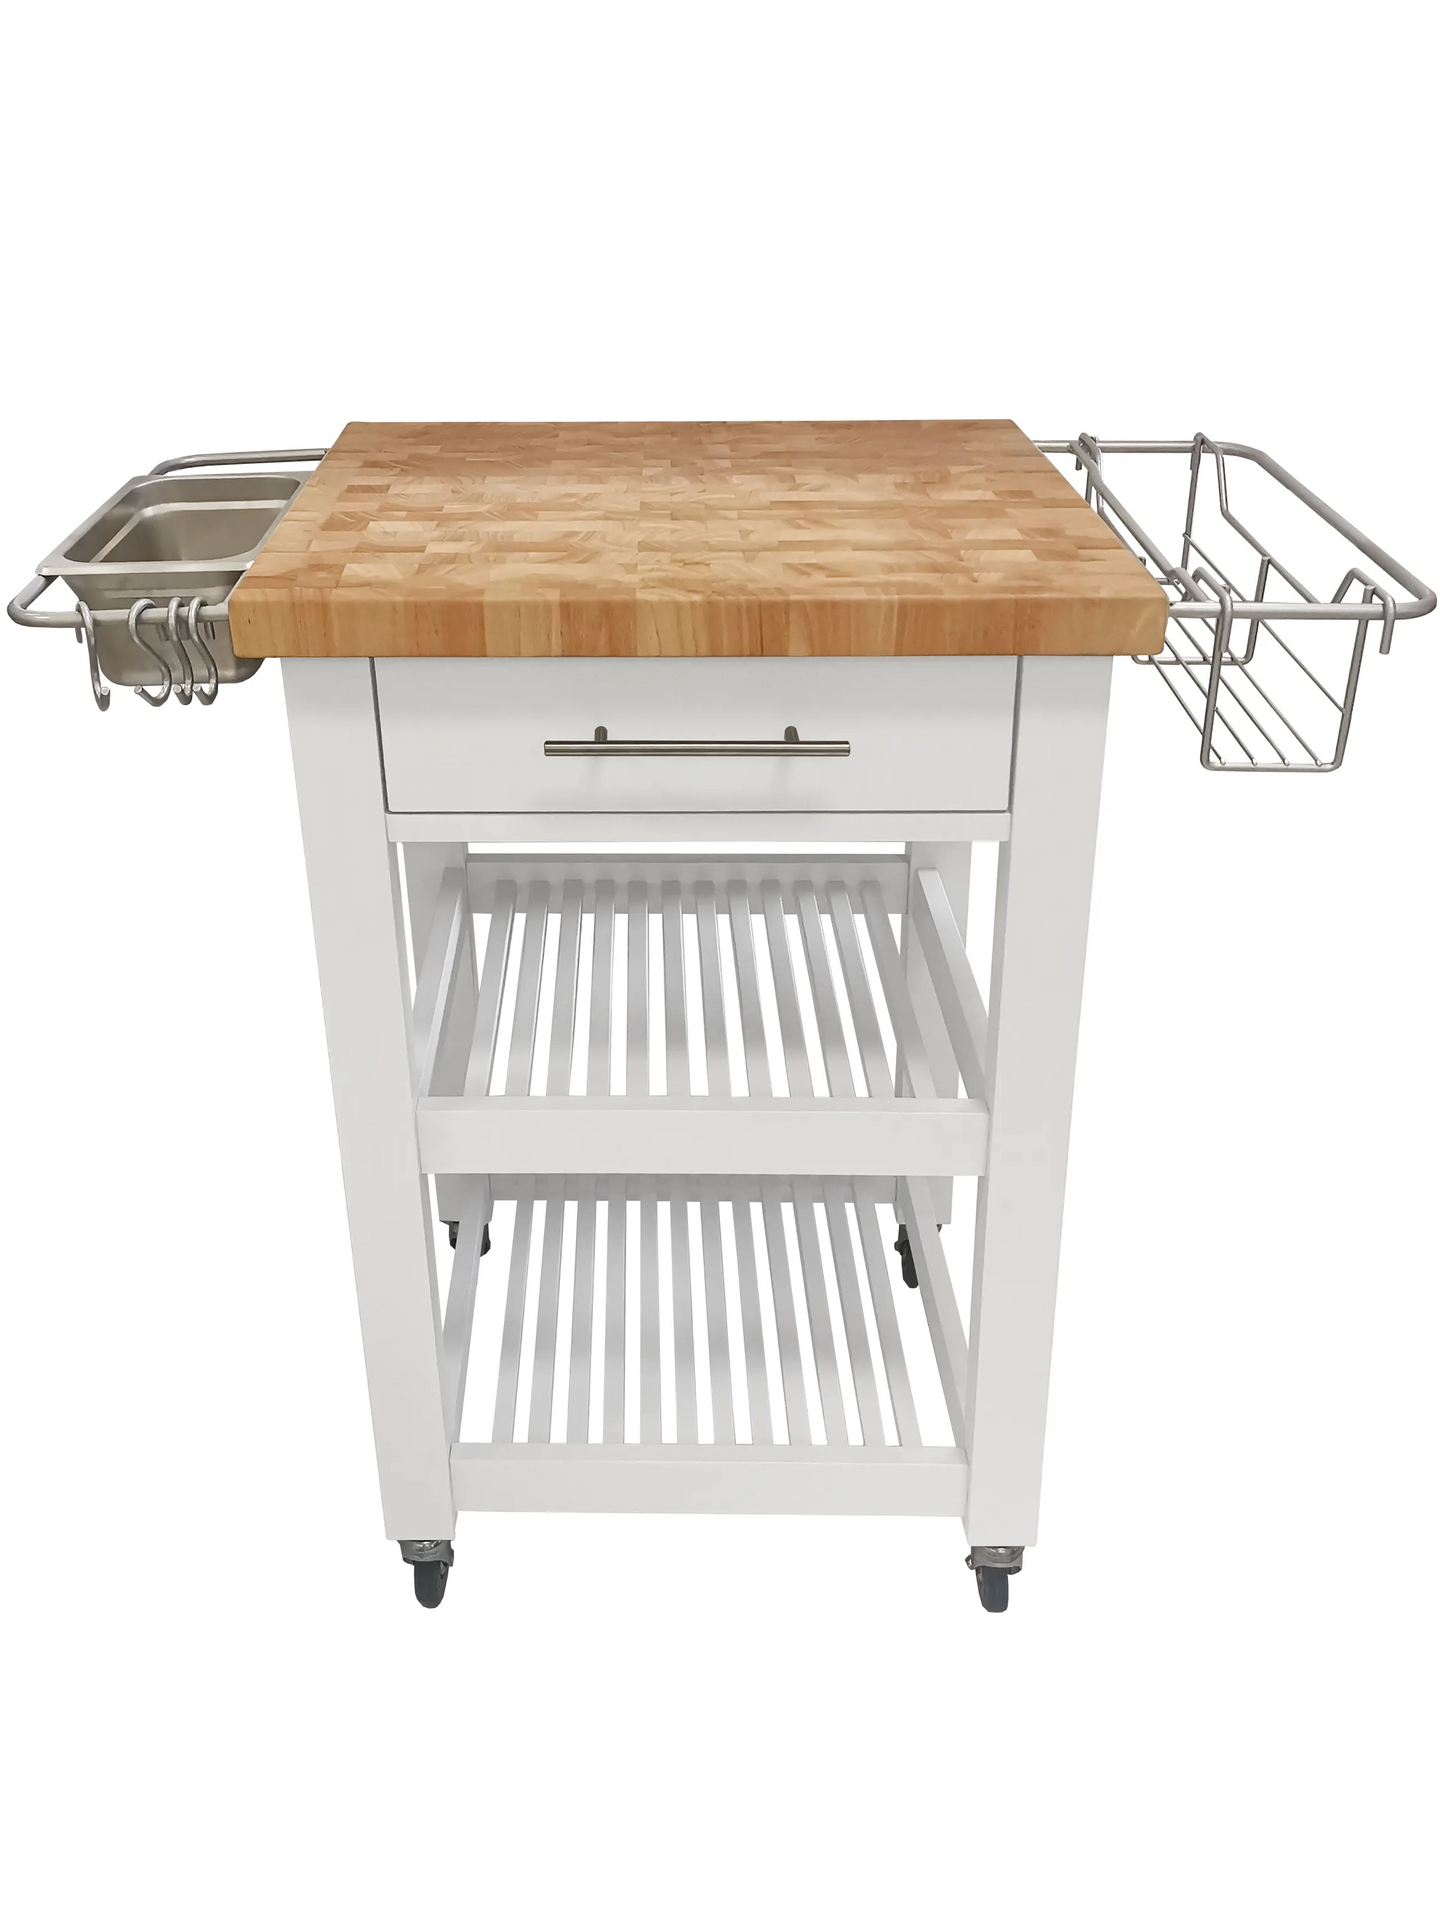 Portable Square Kitchen Cart with Butcher Block Top and Wood Shelves in White Finish